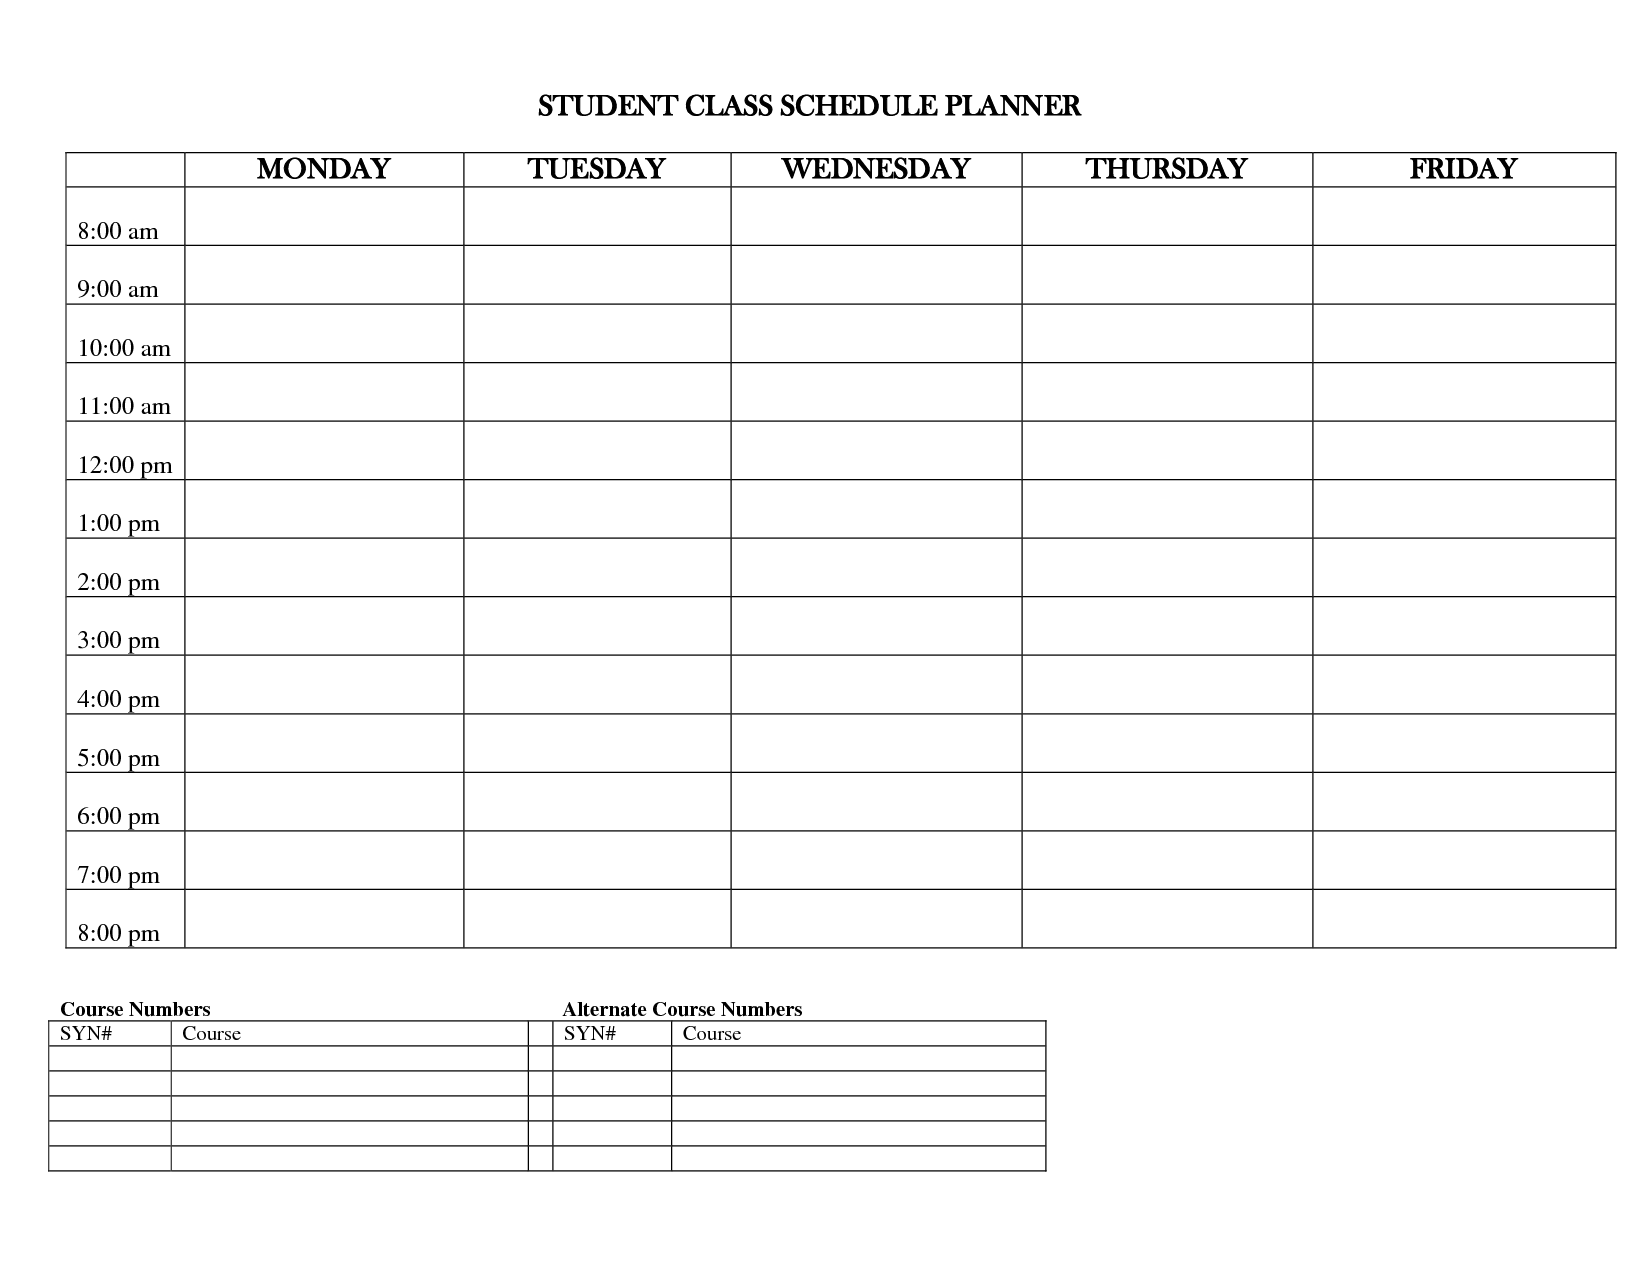 74 Free Student Class Schedule Template Photo by Student Class Schedule Template